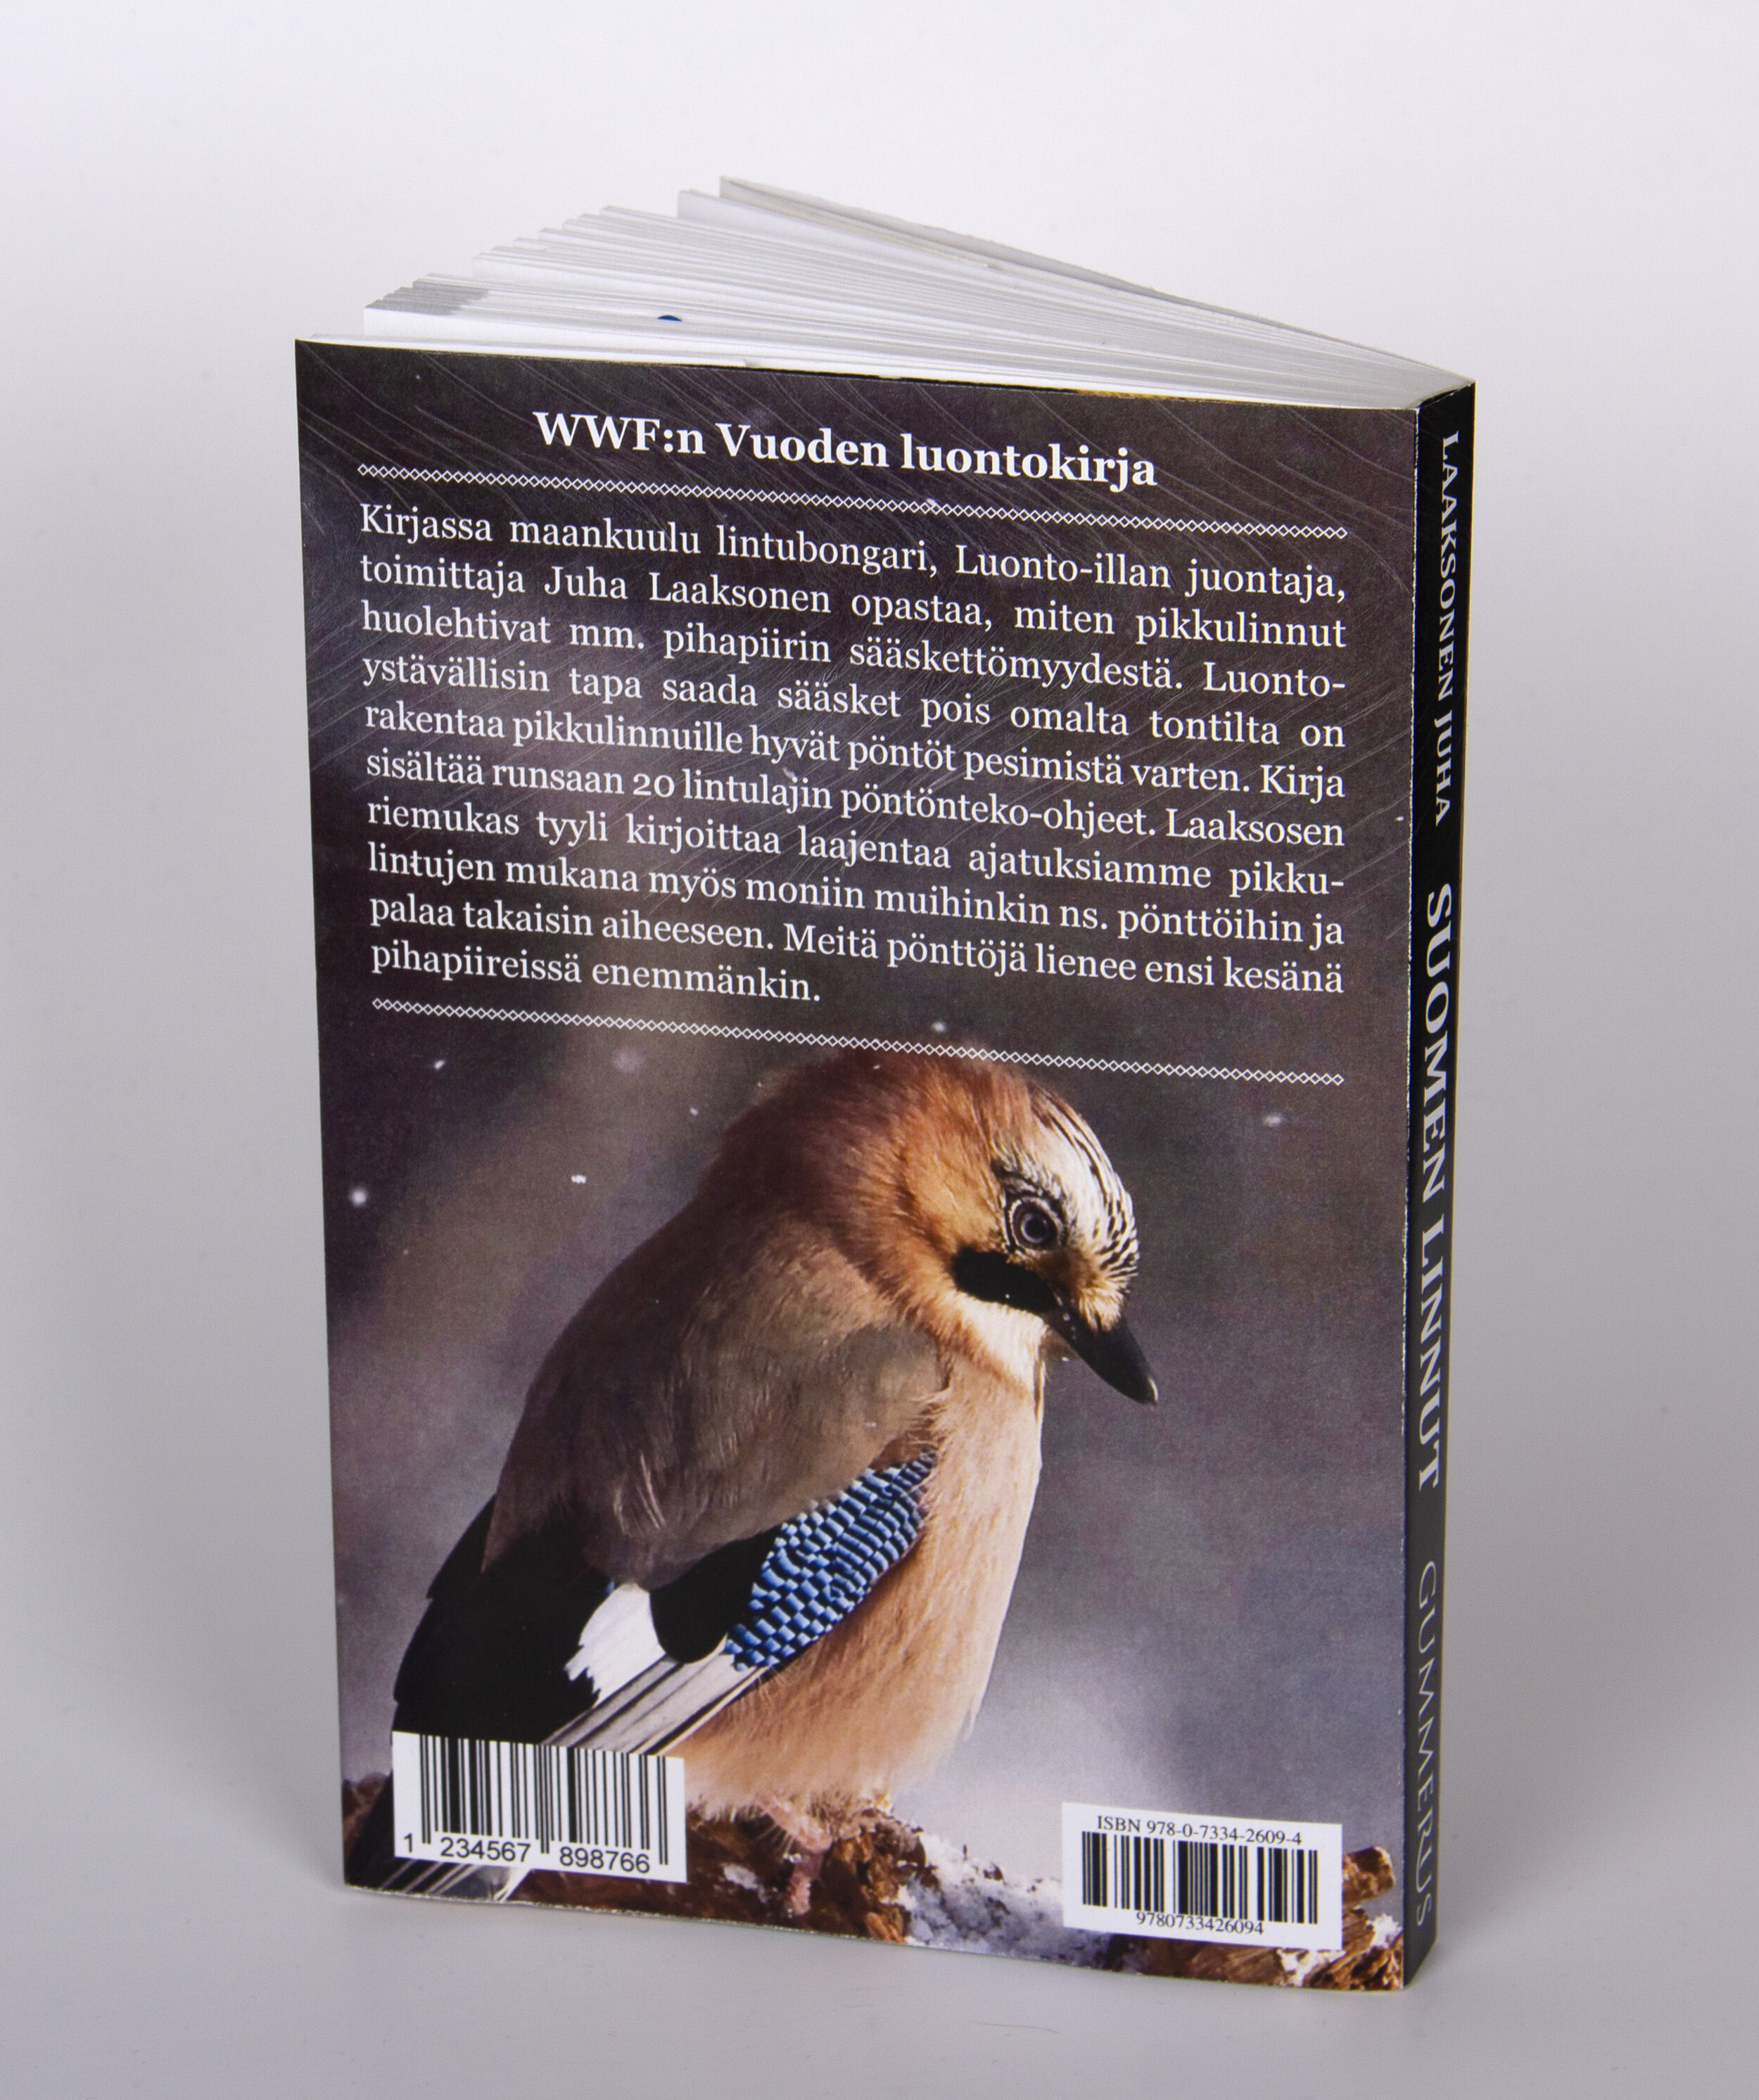  Back cover of a practice work, where we were tasked with redesigning the covers for a bird book with appropriate imagery, font selection, and placement. In addition, the taking of product photos was also practiced.  This was  NOT  an official design